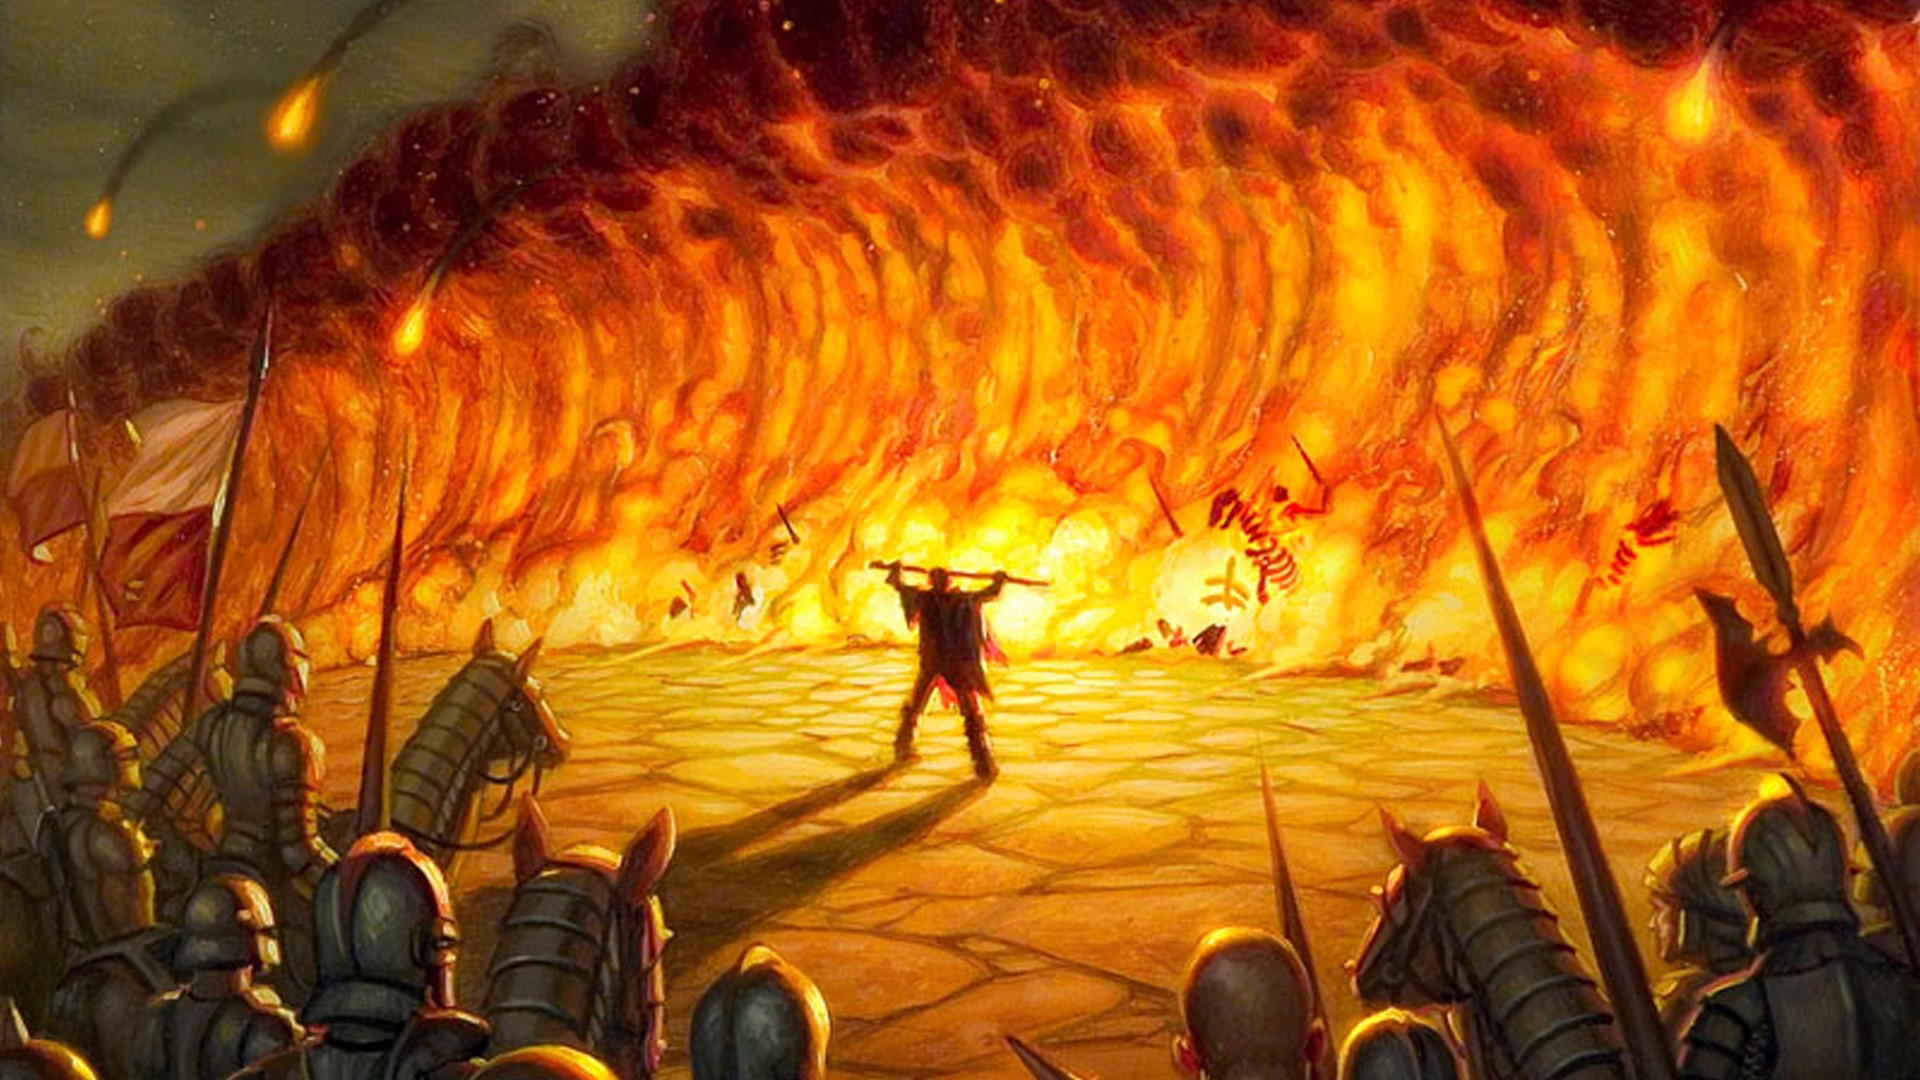 DnD Druid 5E - Wizards of the Coast artwork showing the D&D spell Wall of Fire burning an army to cinders